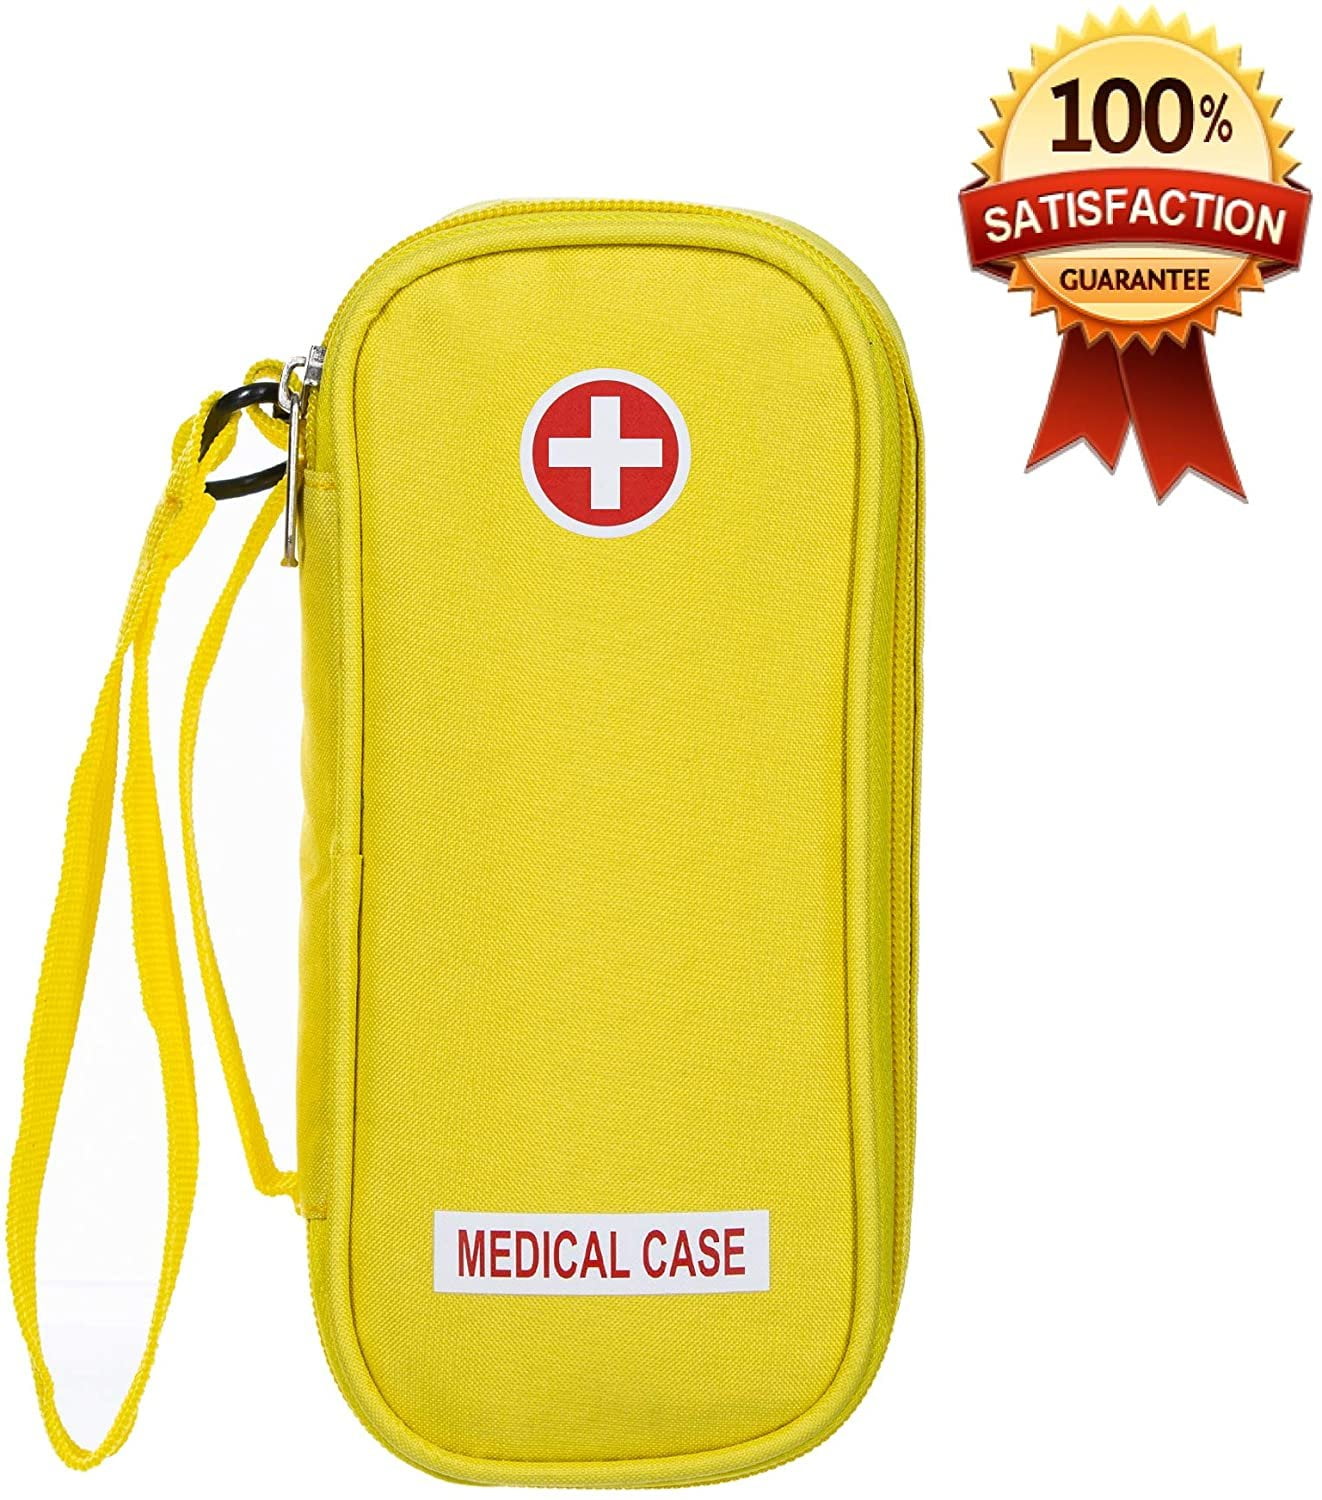 Epipen Carrying Medical Case Yellow Insulated Portable Bag With Zipper For 2 Epipens Auvi